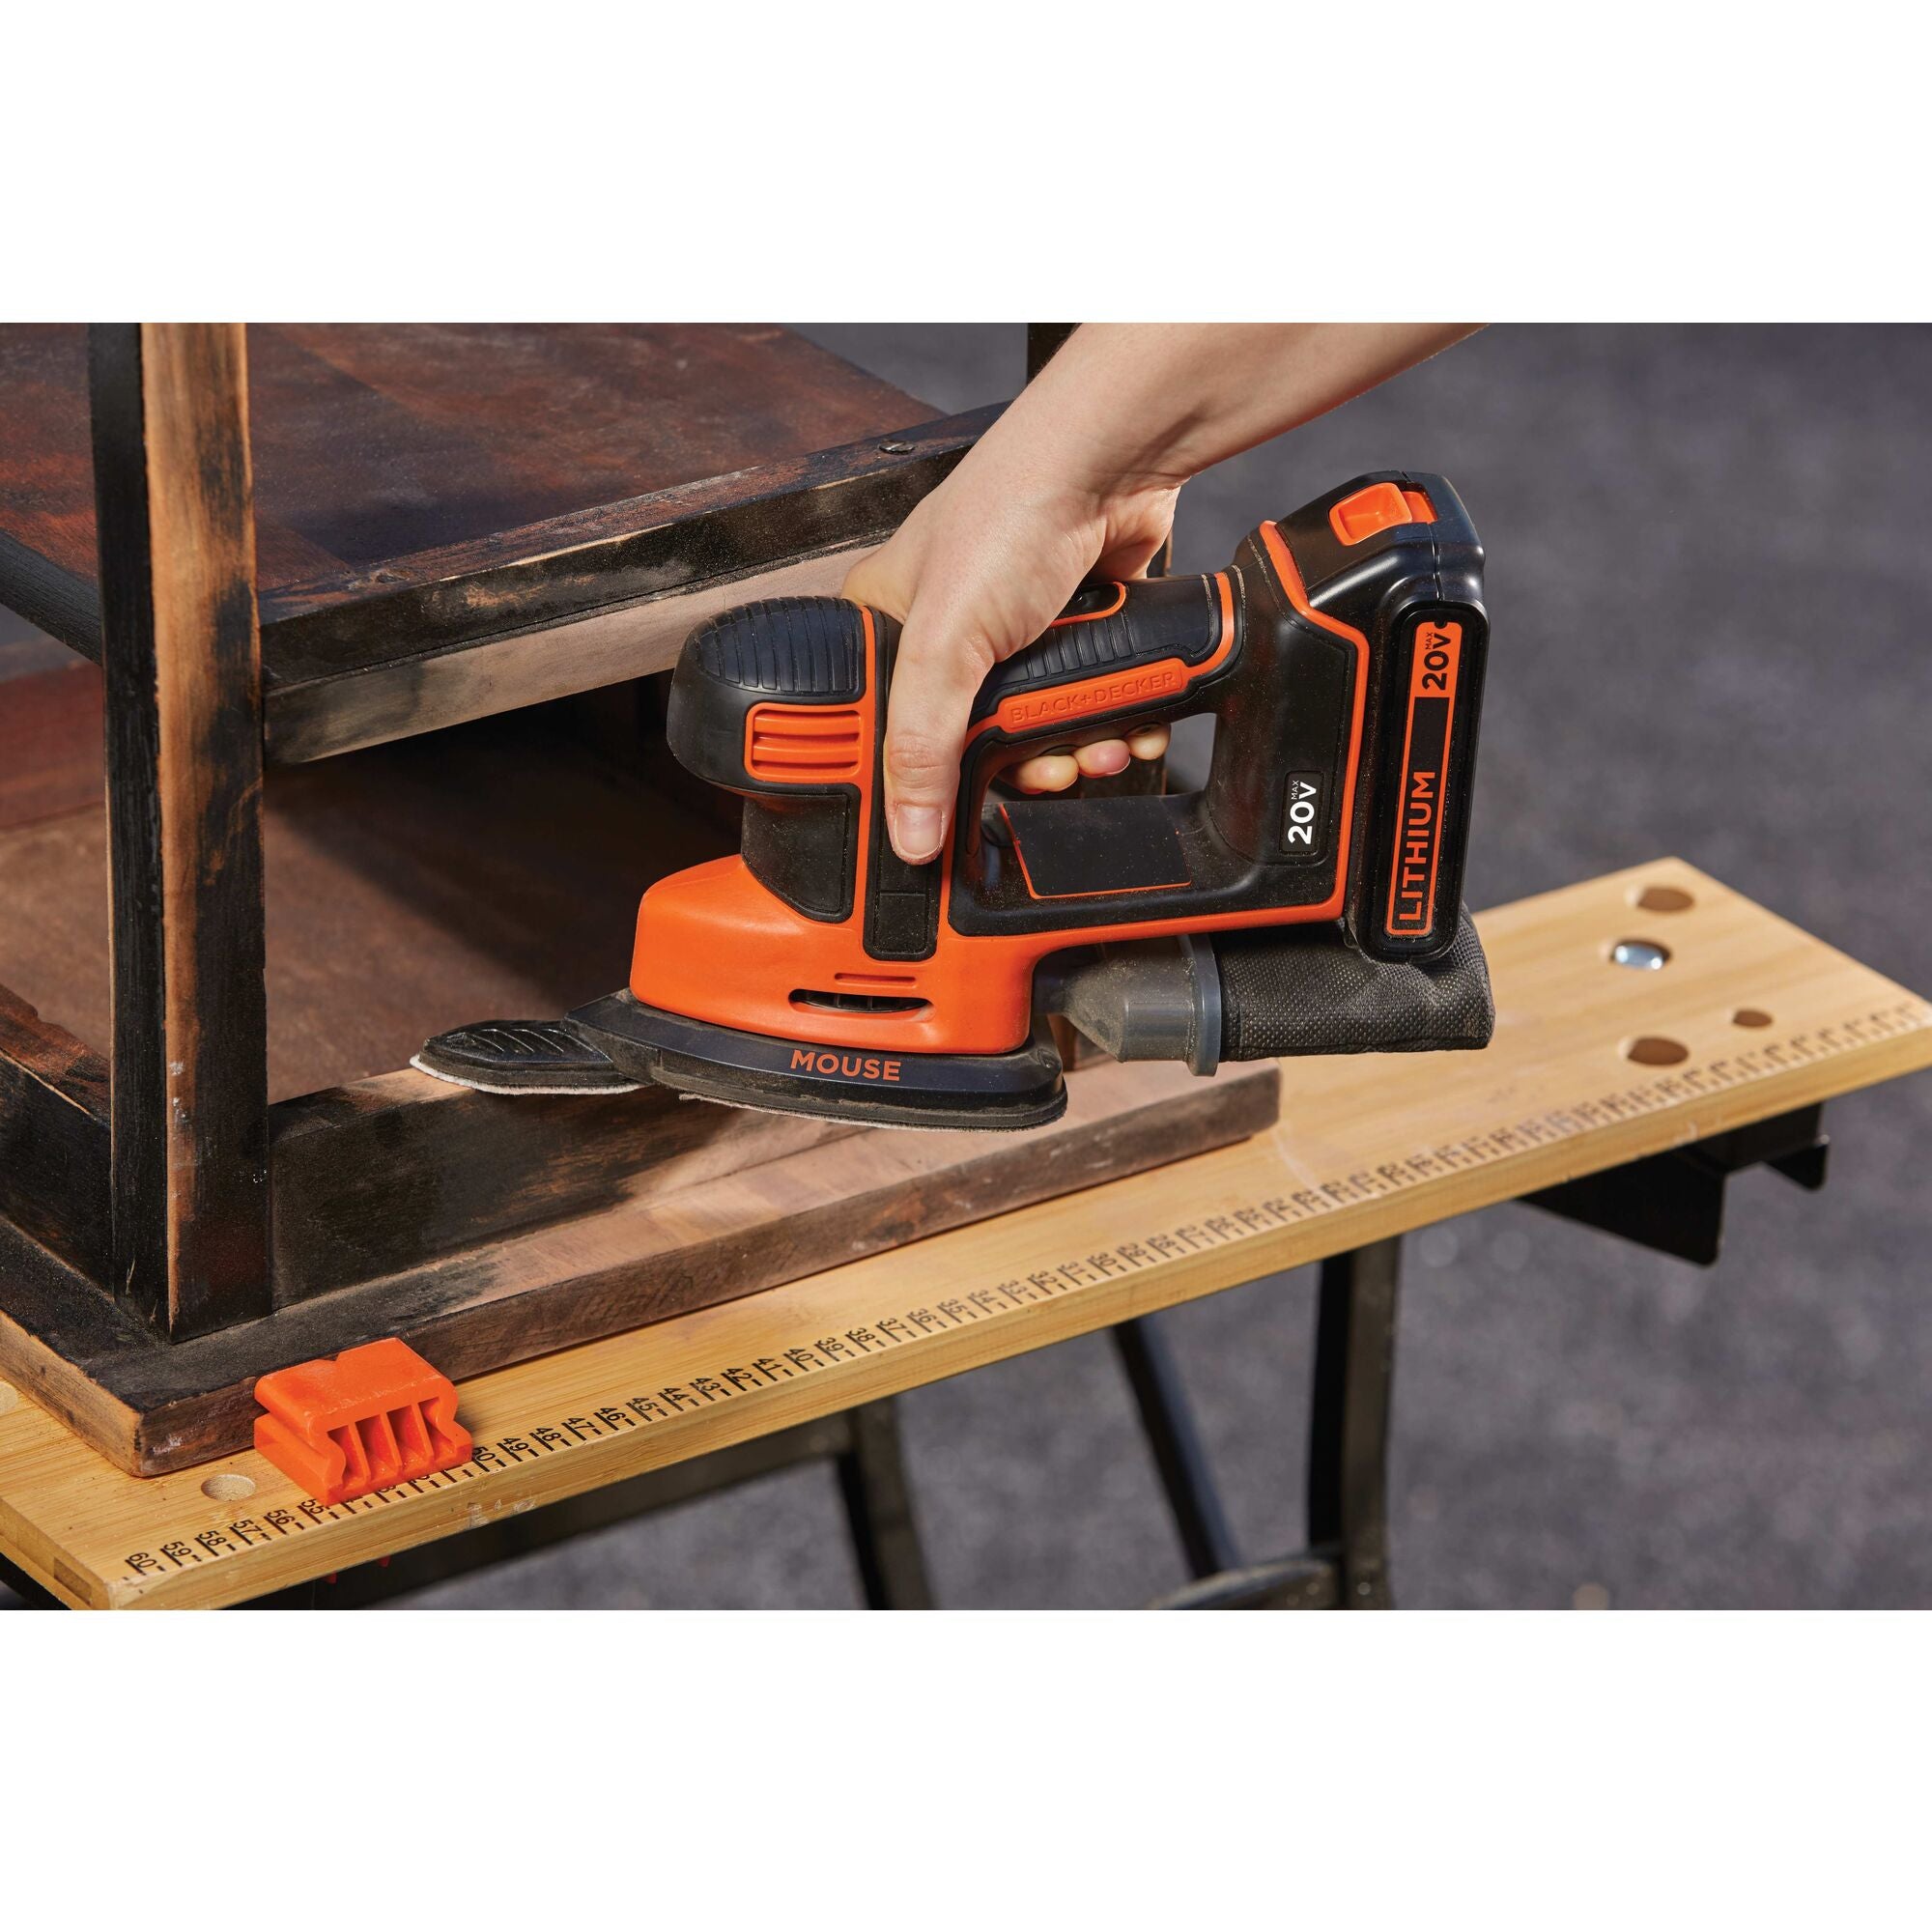 20V Max* Powerconnect Cordless Drill/Driver + Mouse Detail Sander Combo Kit